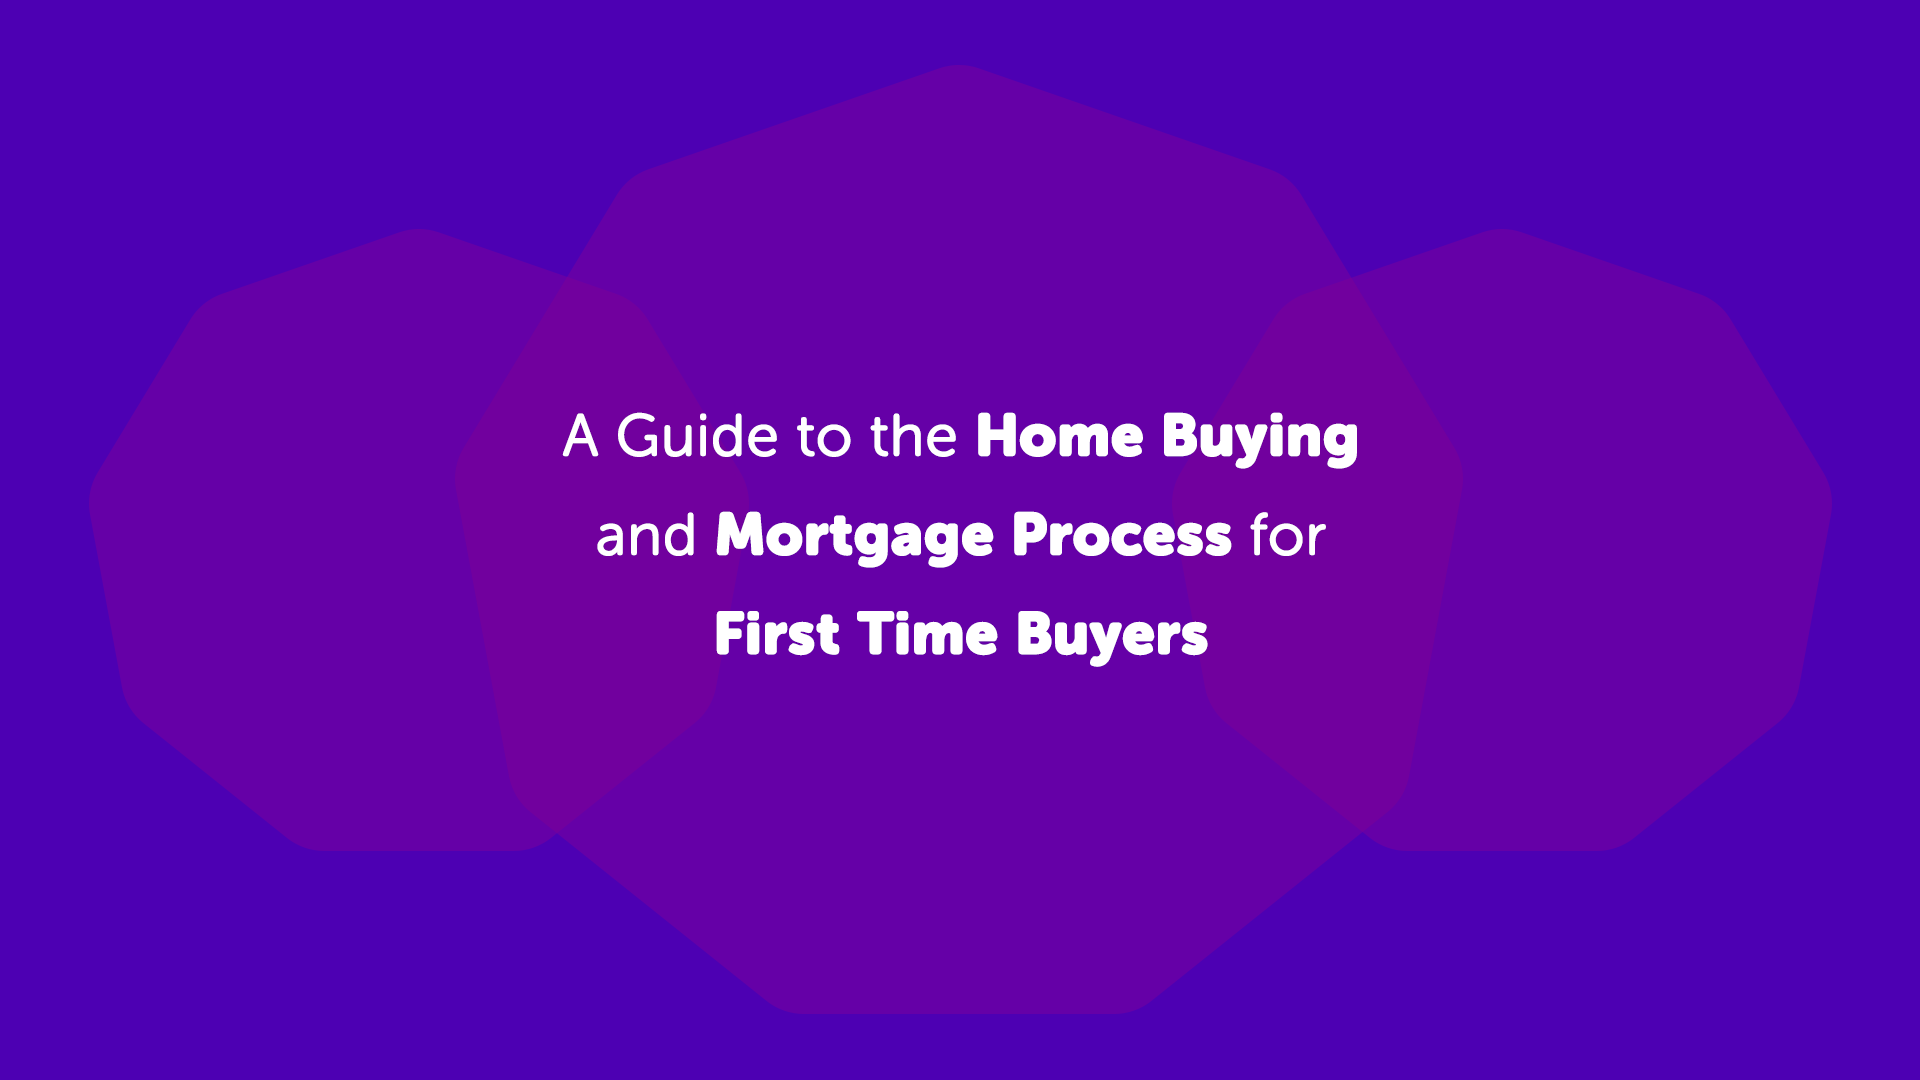 A Guide to Home Buying & Mortgages for First Time Buyers in Bristol | Bristolmoneyman